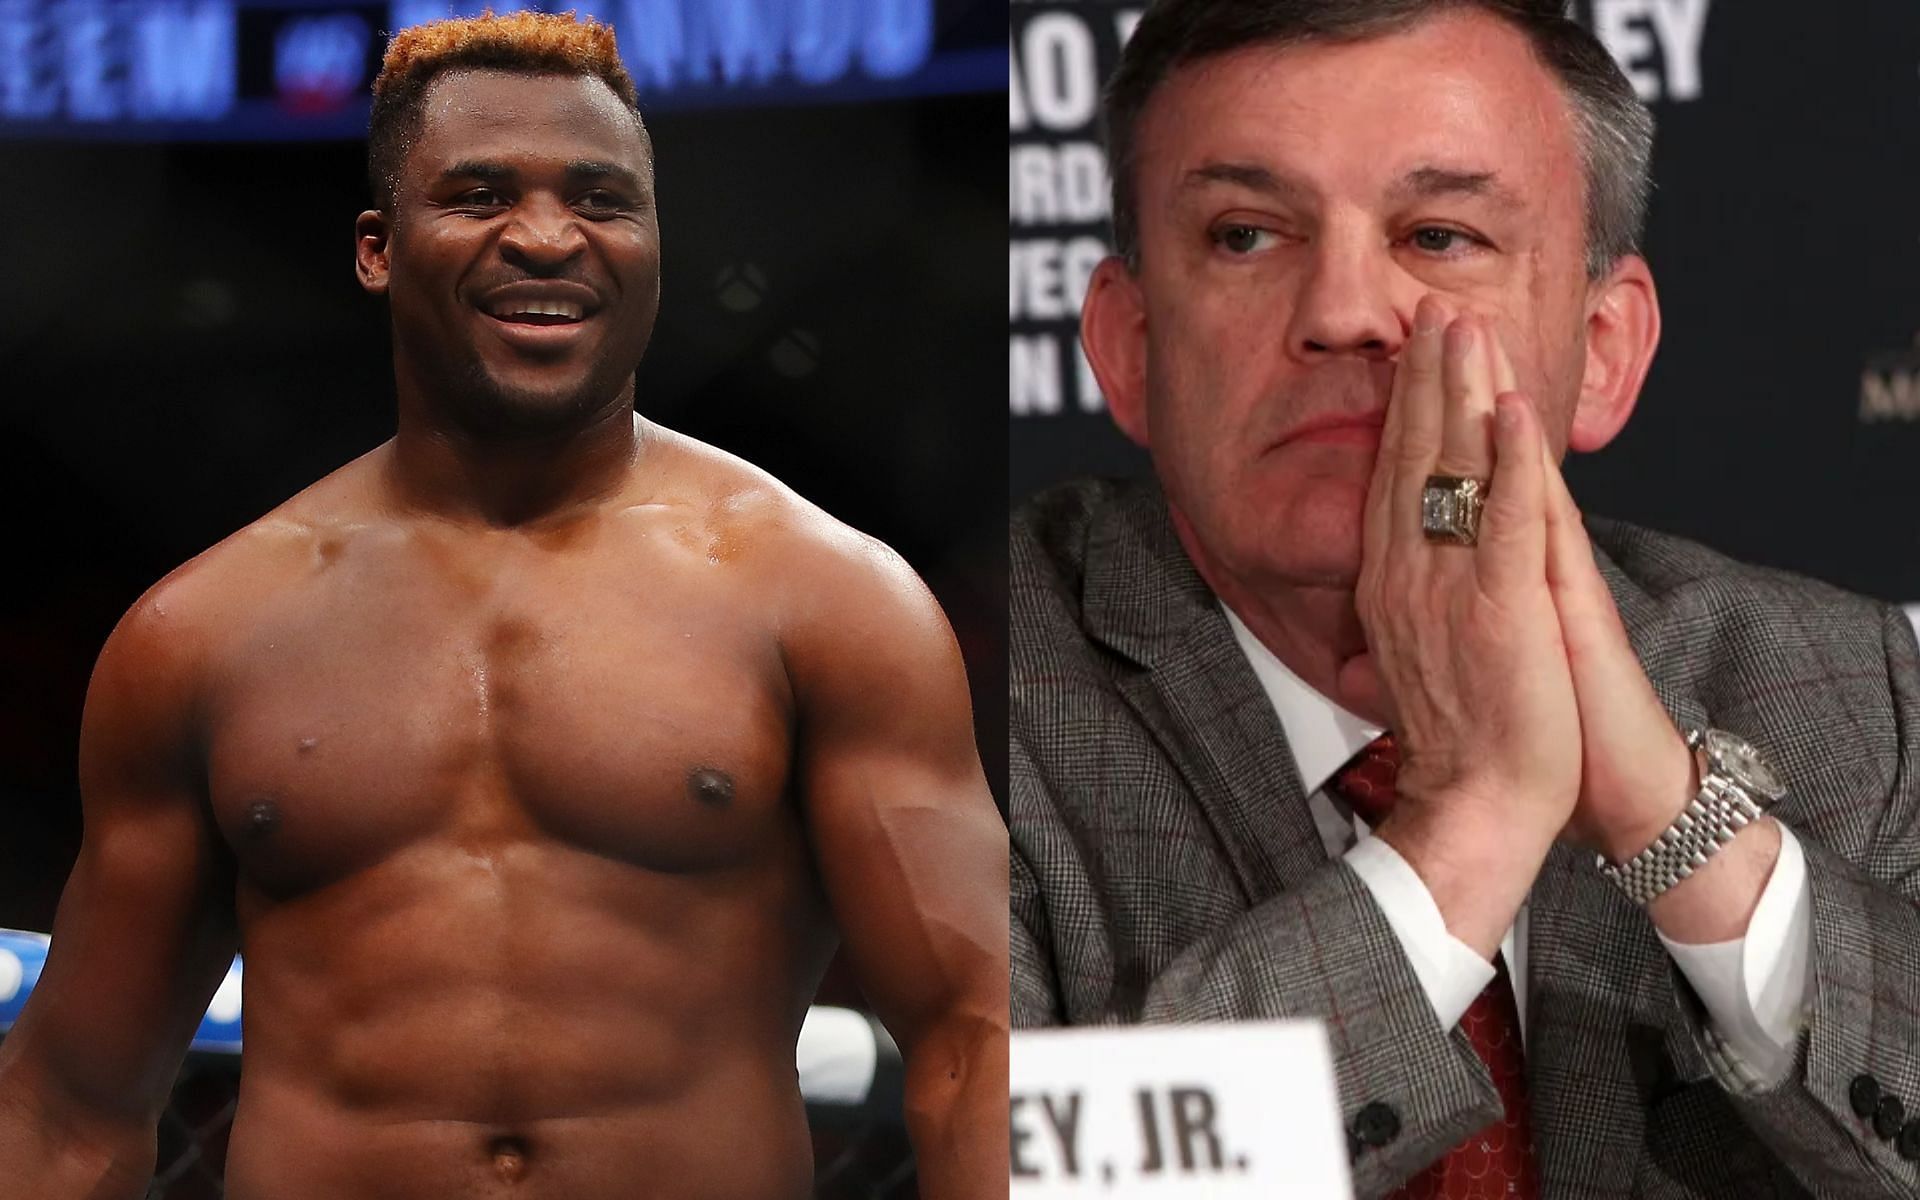 Francis Ngannou (left) and Teddy Atlas (right). [via Getty Images]